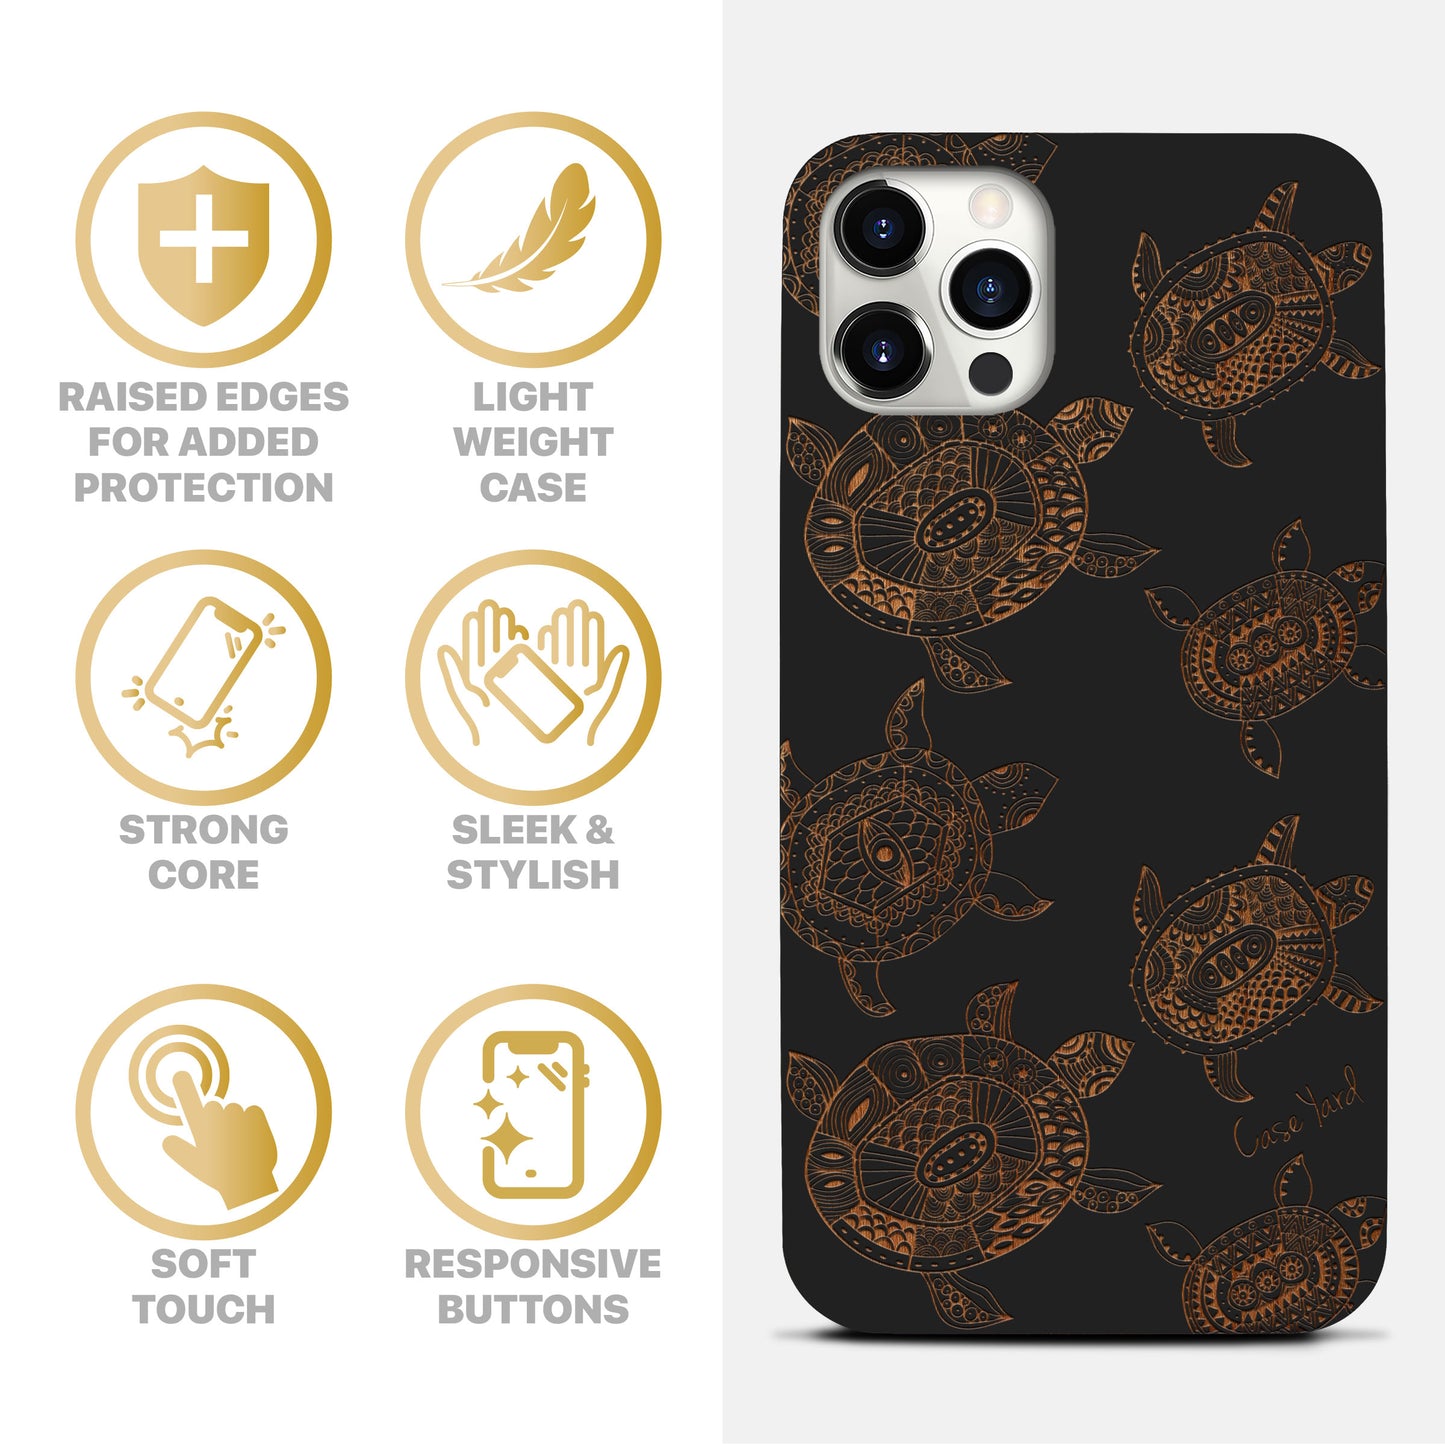 Wooden Cell Phone Case Cover, Laser Engraved case for iPhone & Samsung phone Turtles Pattern Design